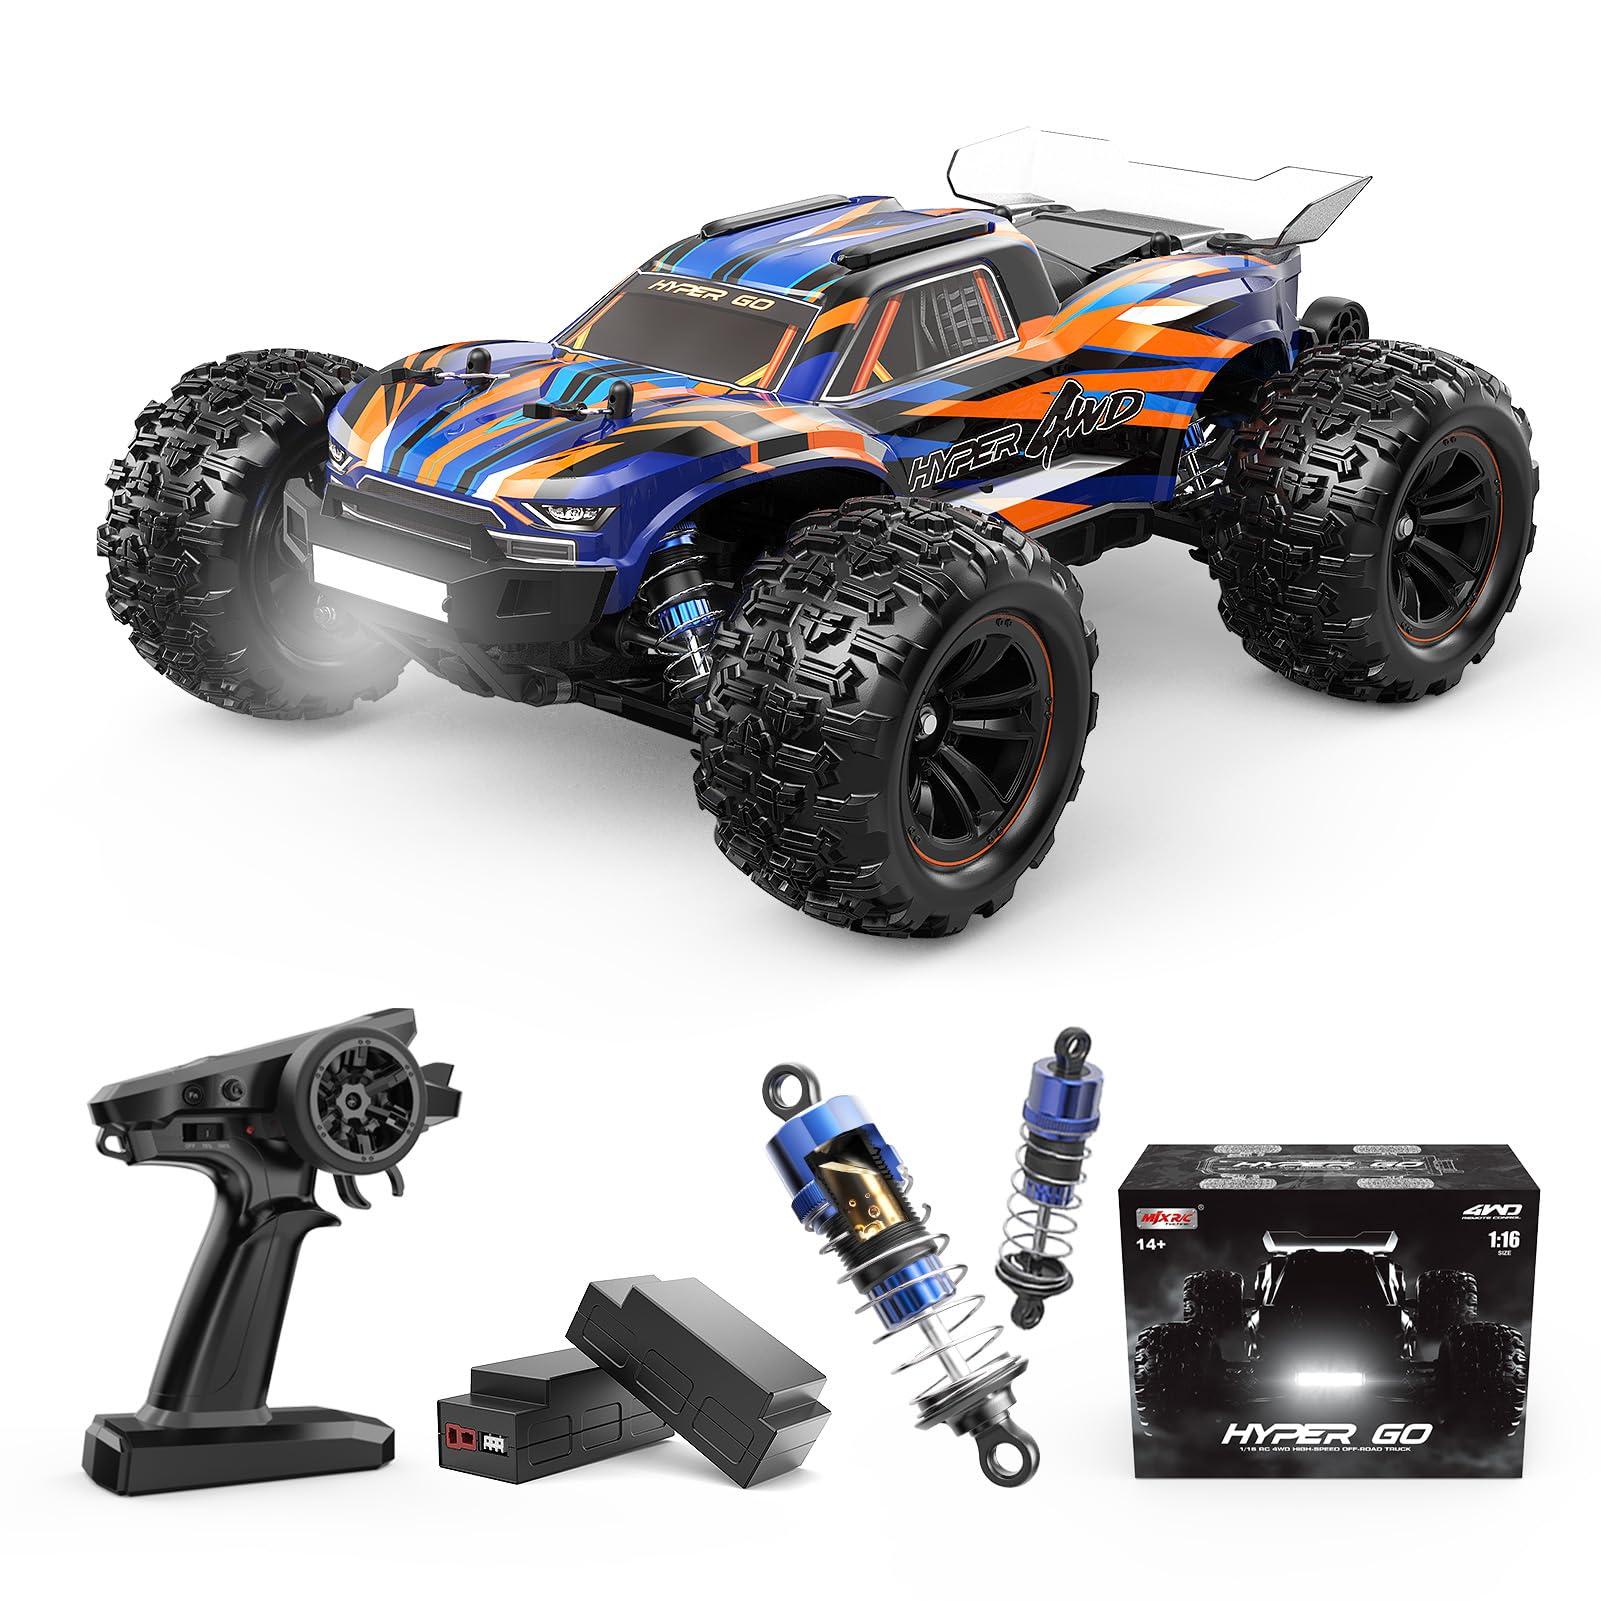 Cheap Rc Cars That Go Fast: Key Considerations for Cheap and Fast RC Cars